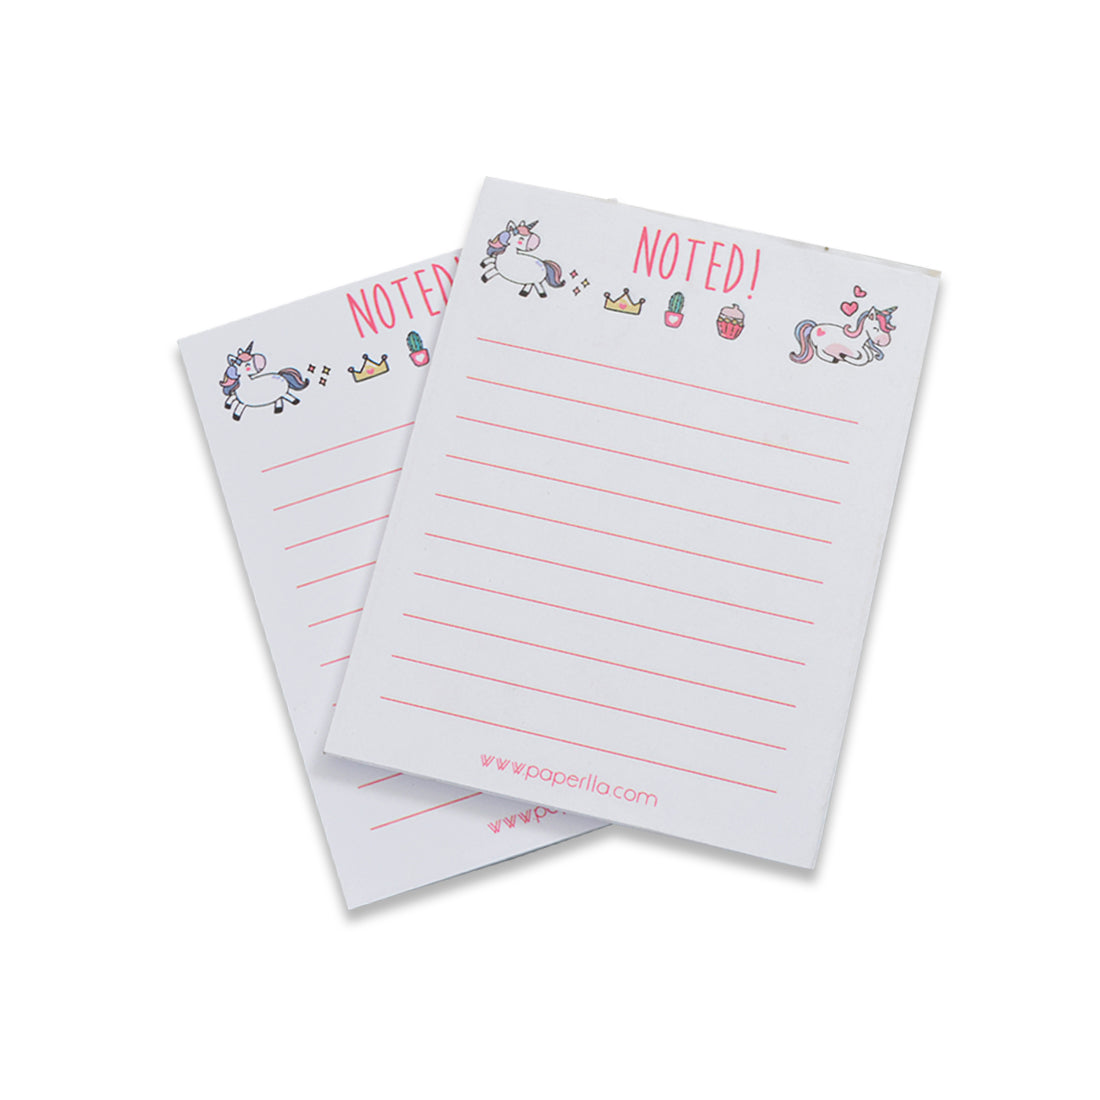 Great Gifts by Chatsworth Notepads - Pretty Pastel Notepads: More Than Paper